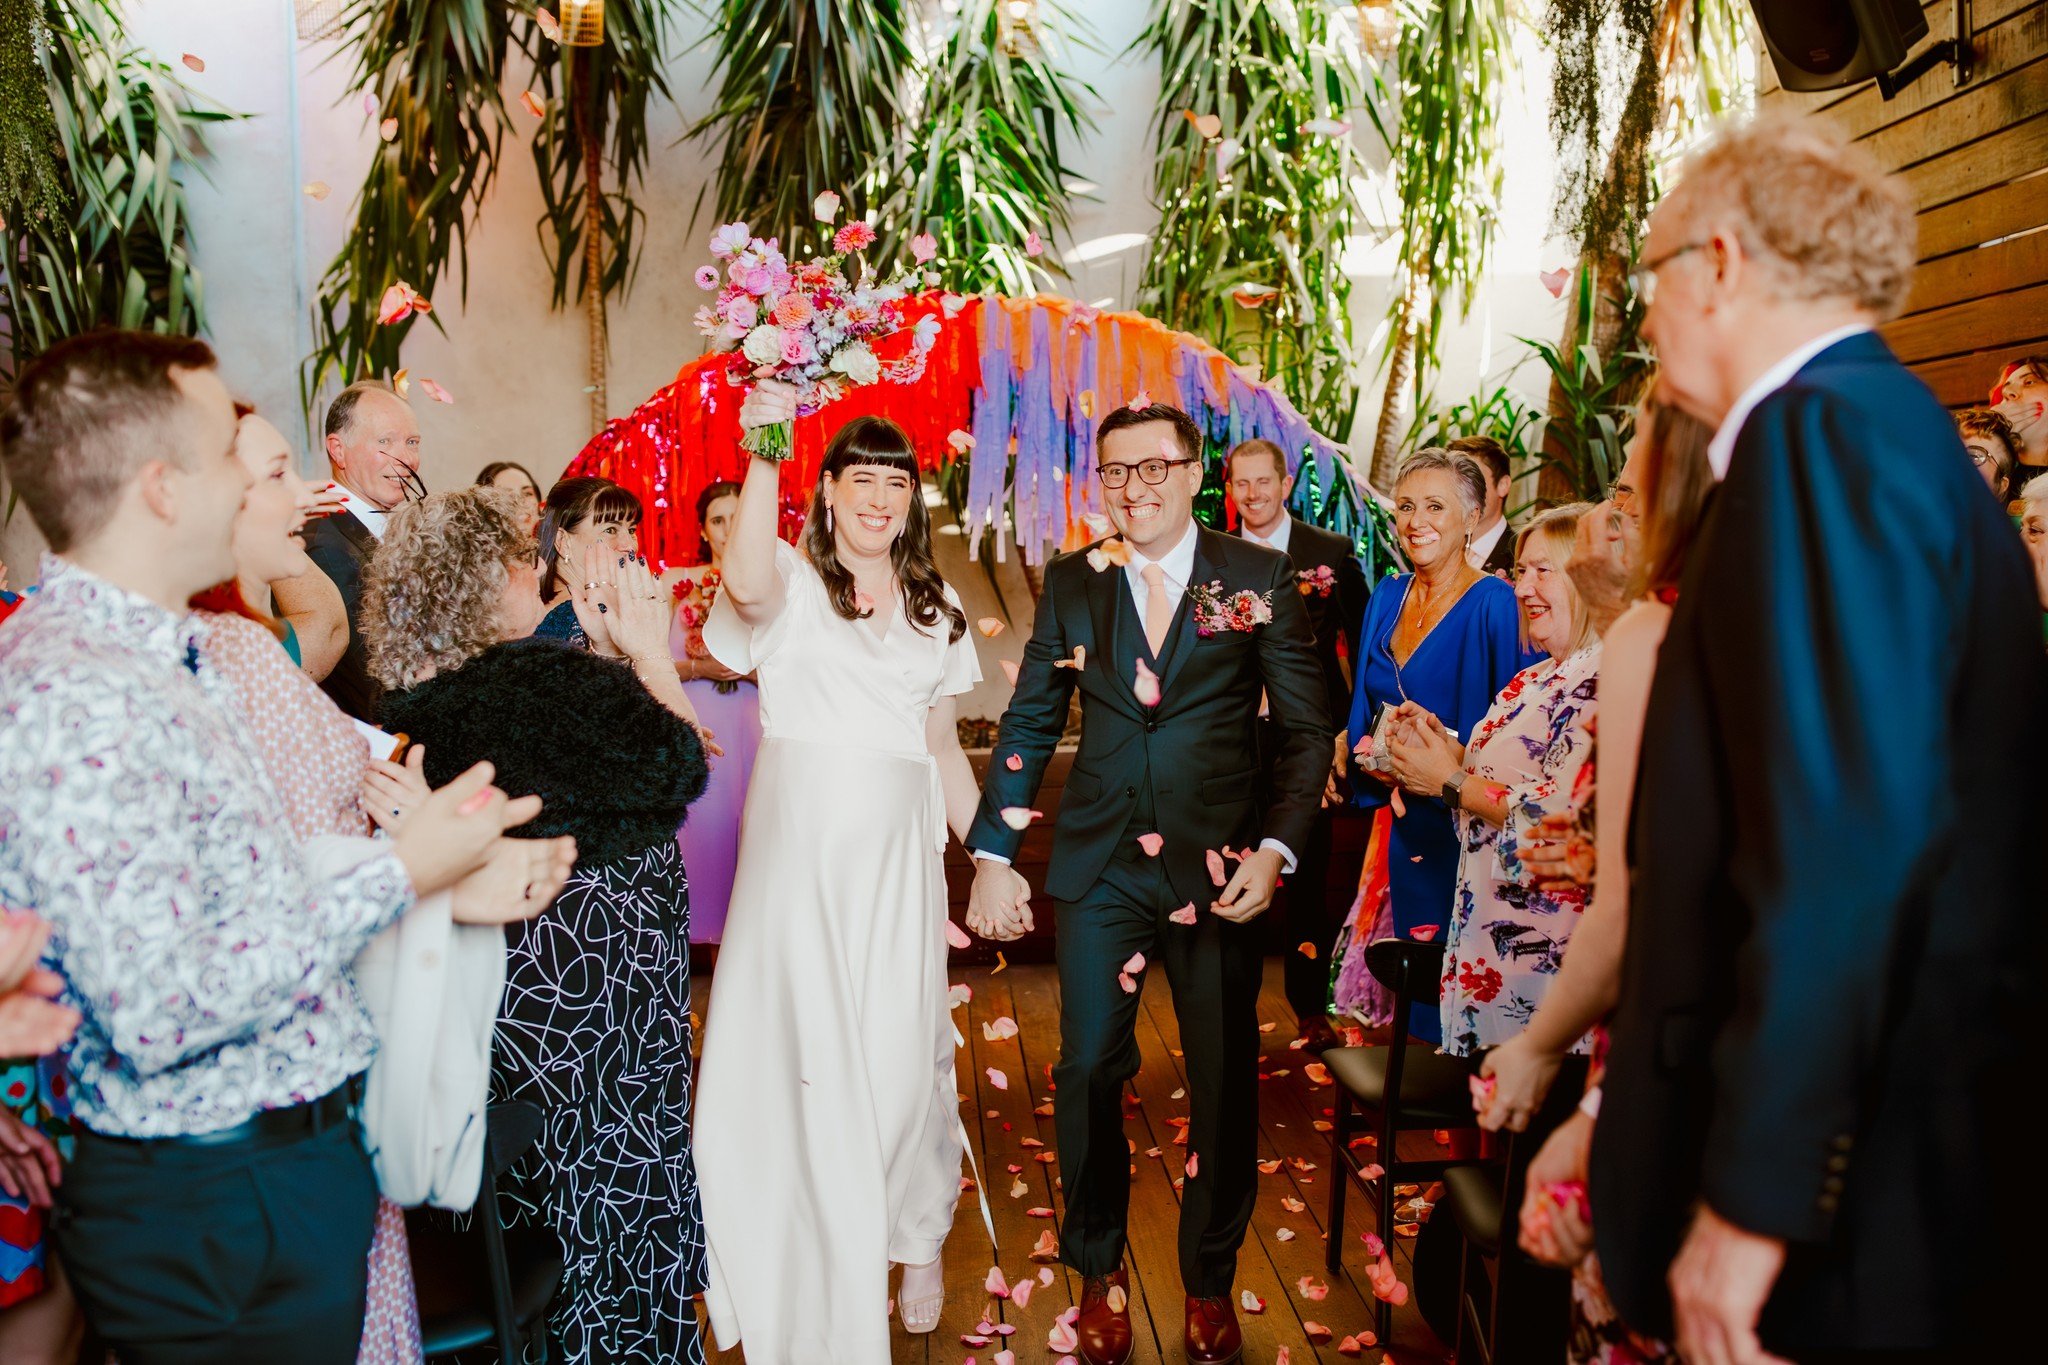 Here's a little sneak peak from Kelly &amp; Matts wedding - it was a DIY dream! It helps when the bride is a graphic design, art guru. Kelly went into so much detail, encapsulating their love and personalities in such creative ways. 

Photographer: @